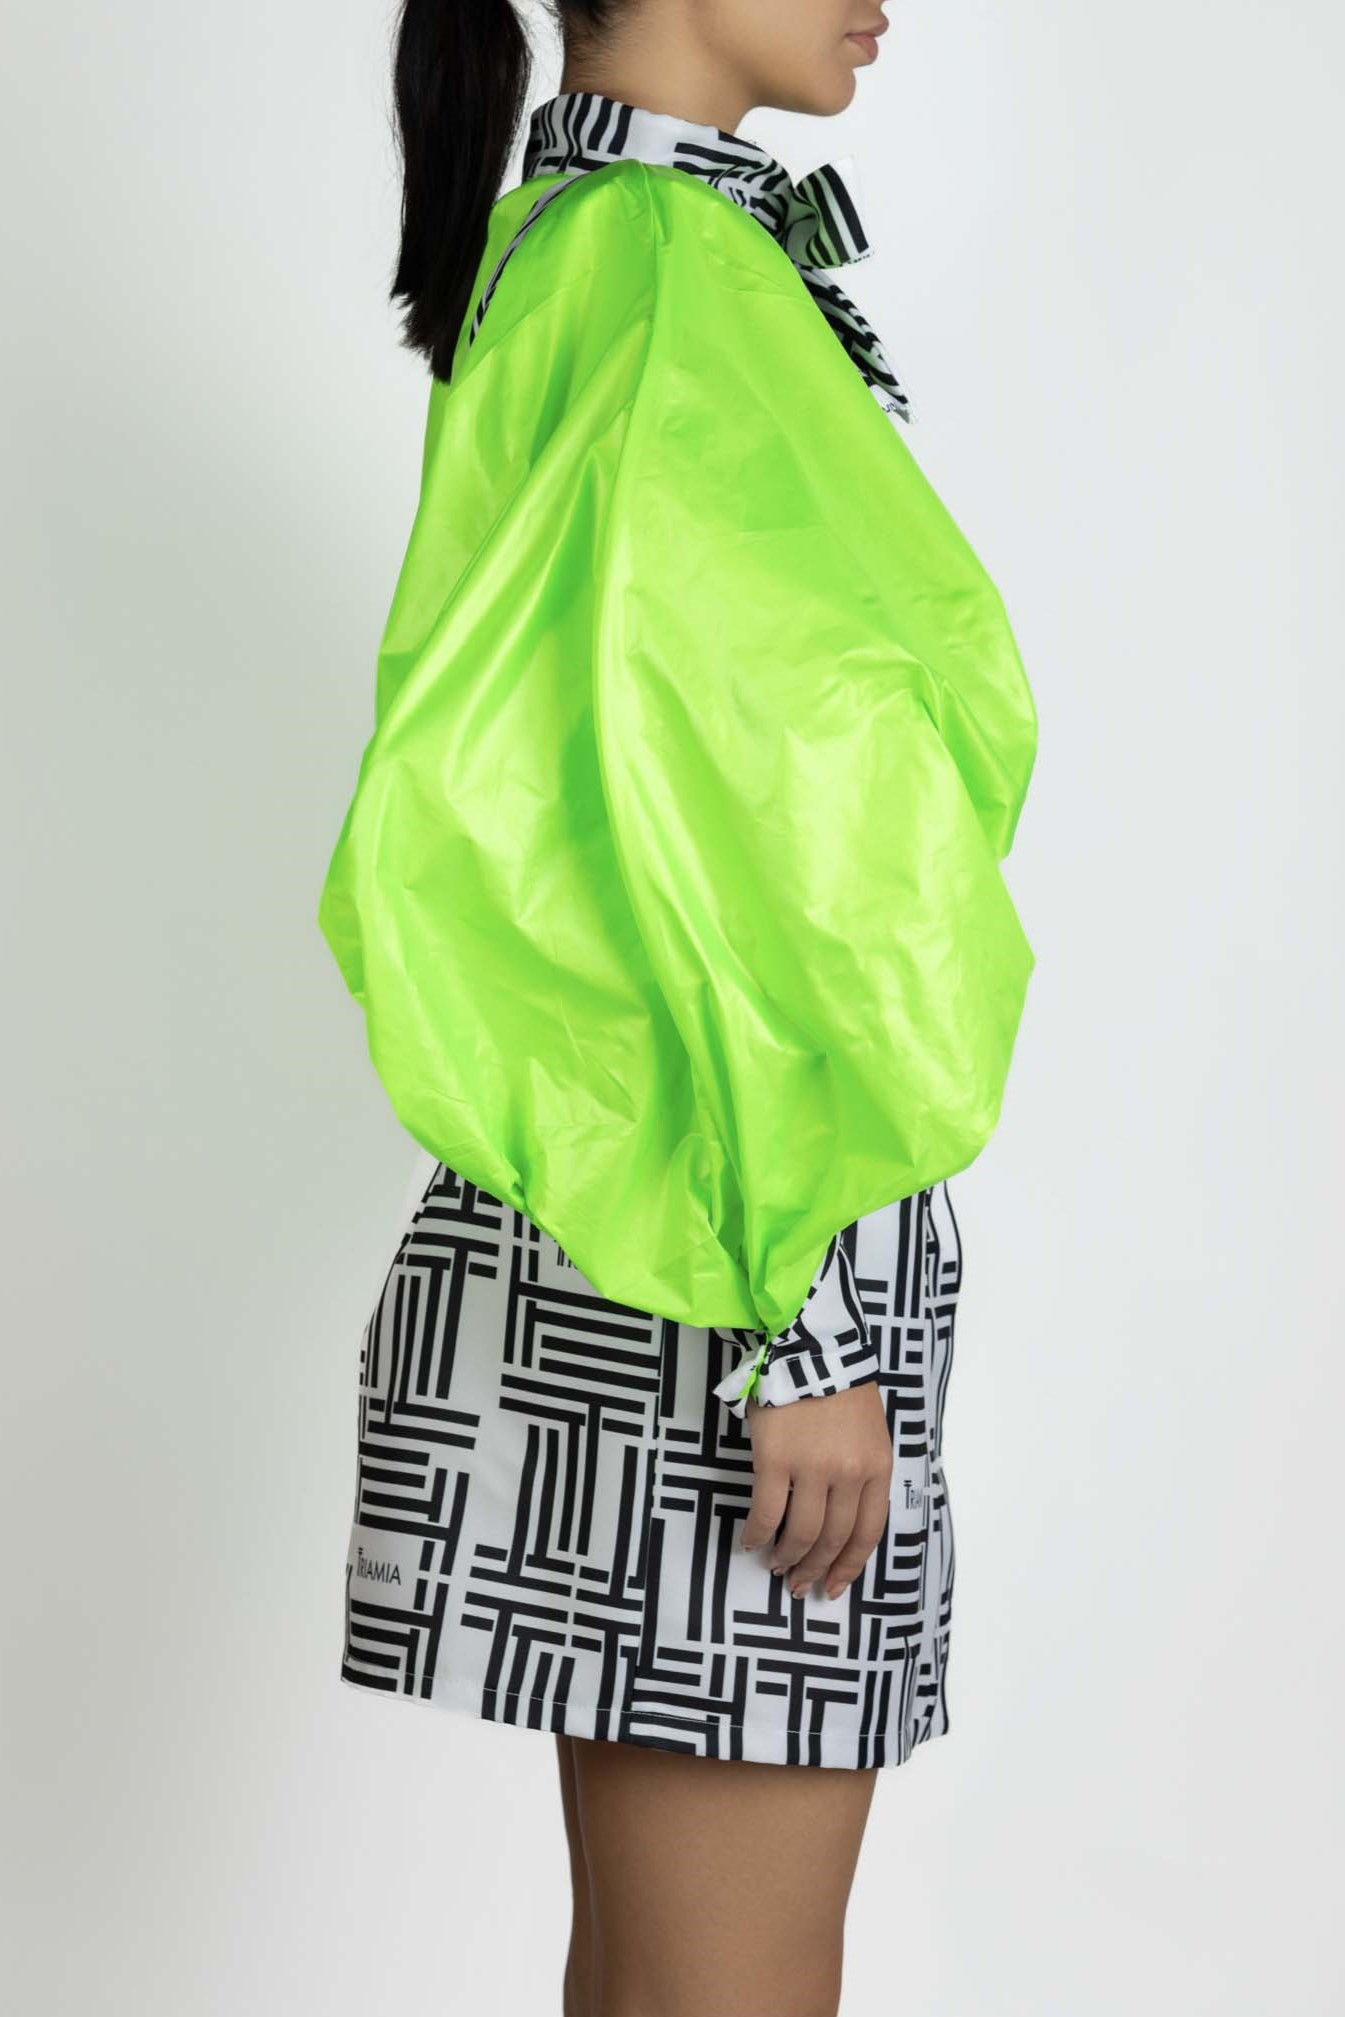 Trench Coat with Triamia Print and neon green details. Side Photo.